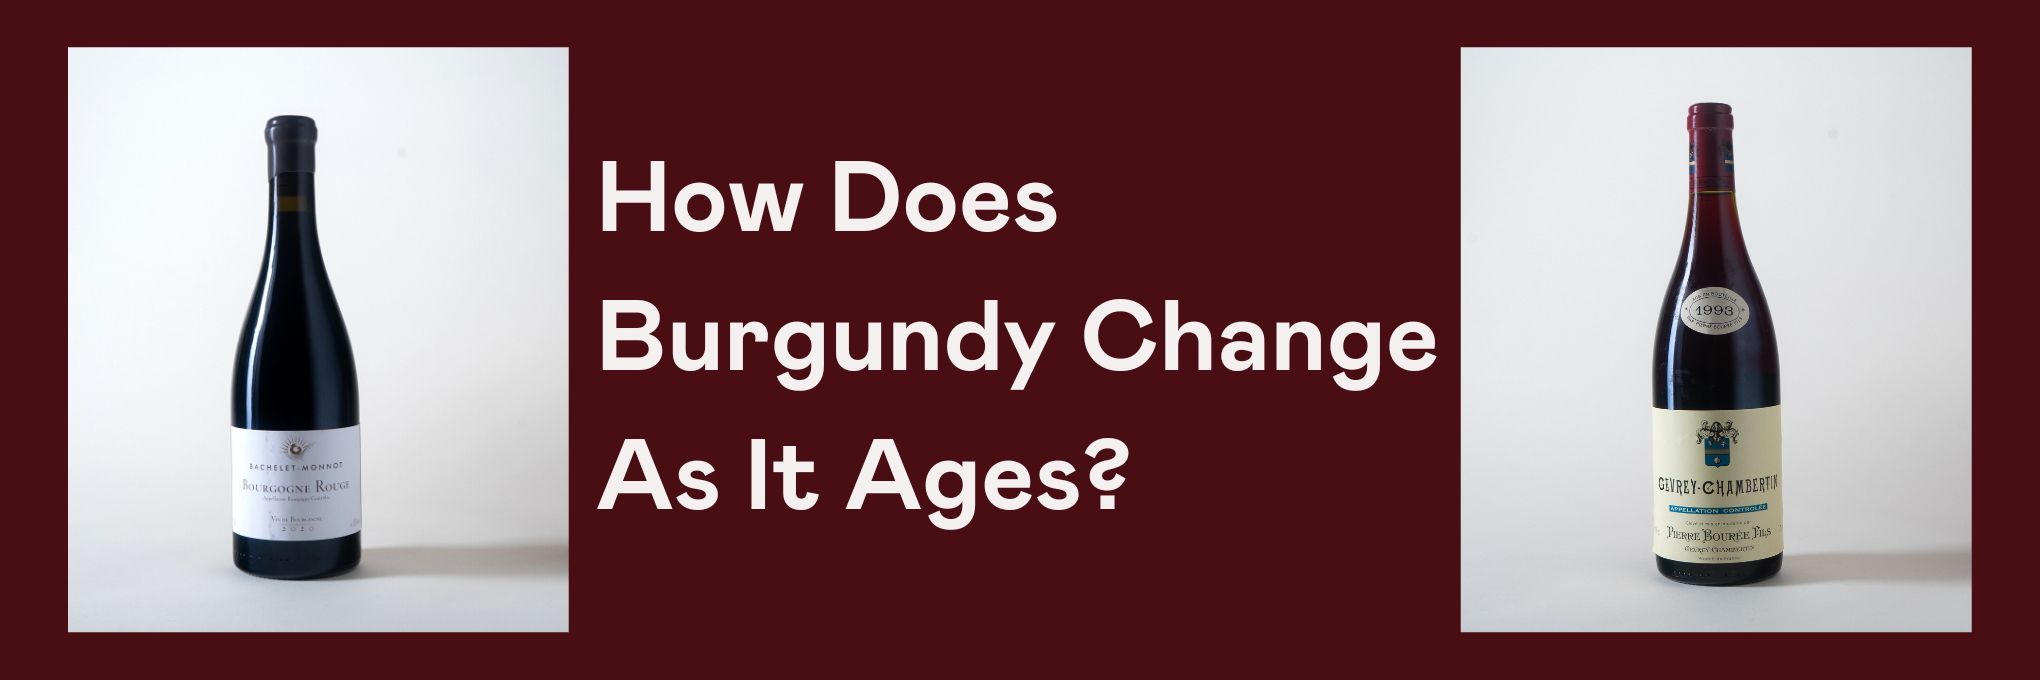 How Does Burgundy Change As It Ages?